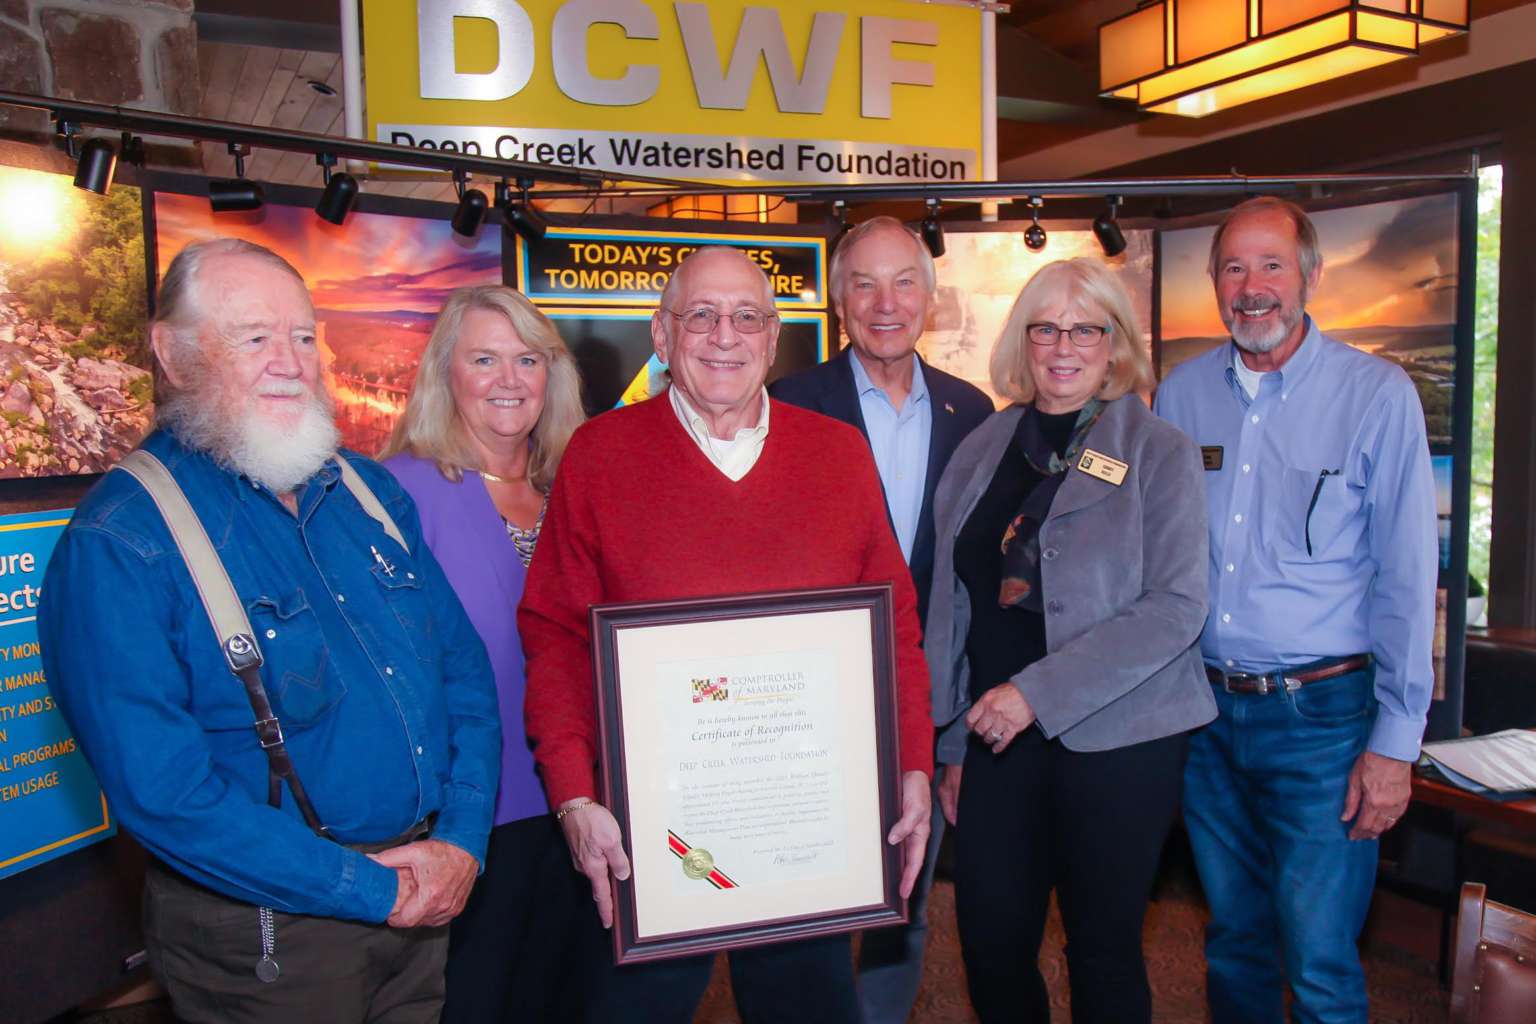 The Deep Creek Watershed Foundation Accepts the "2021 William Donald Shaefer Helping People Award"